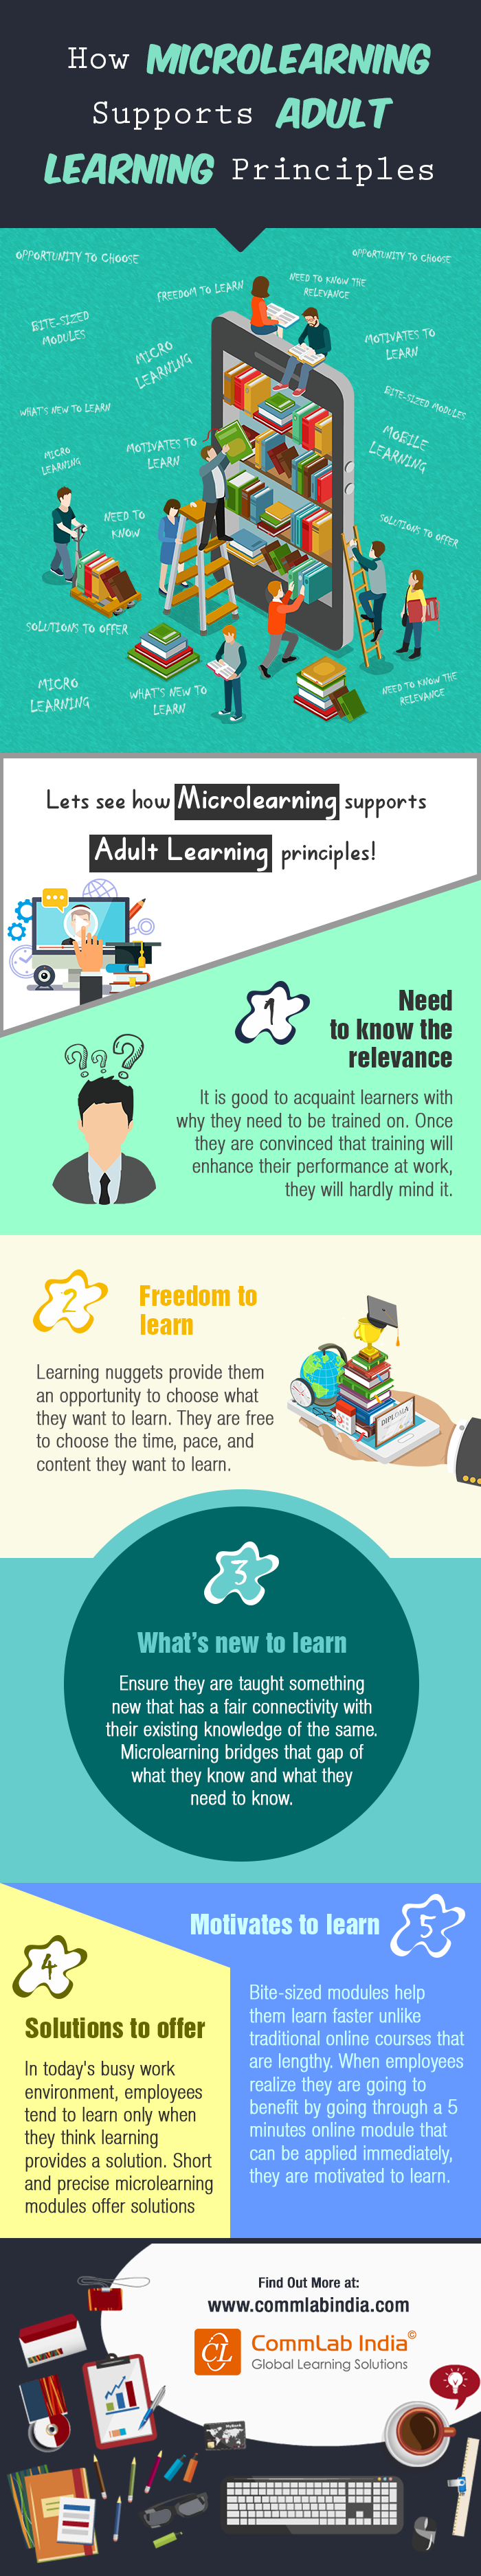 How Microlearning Supports Adult Learning Principles [Infographic]